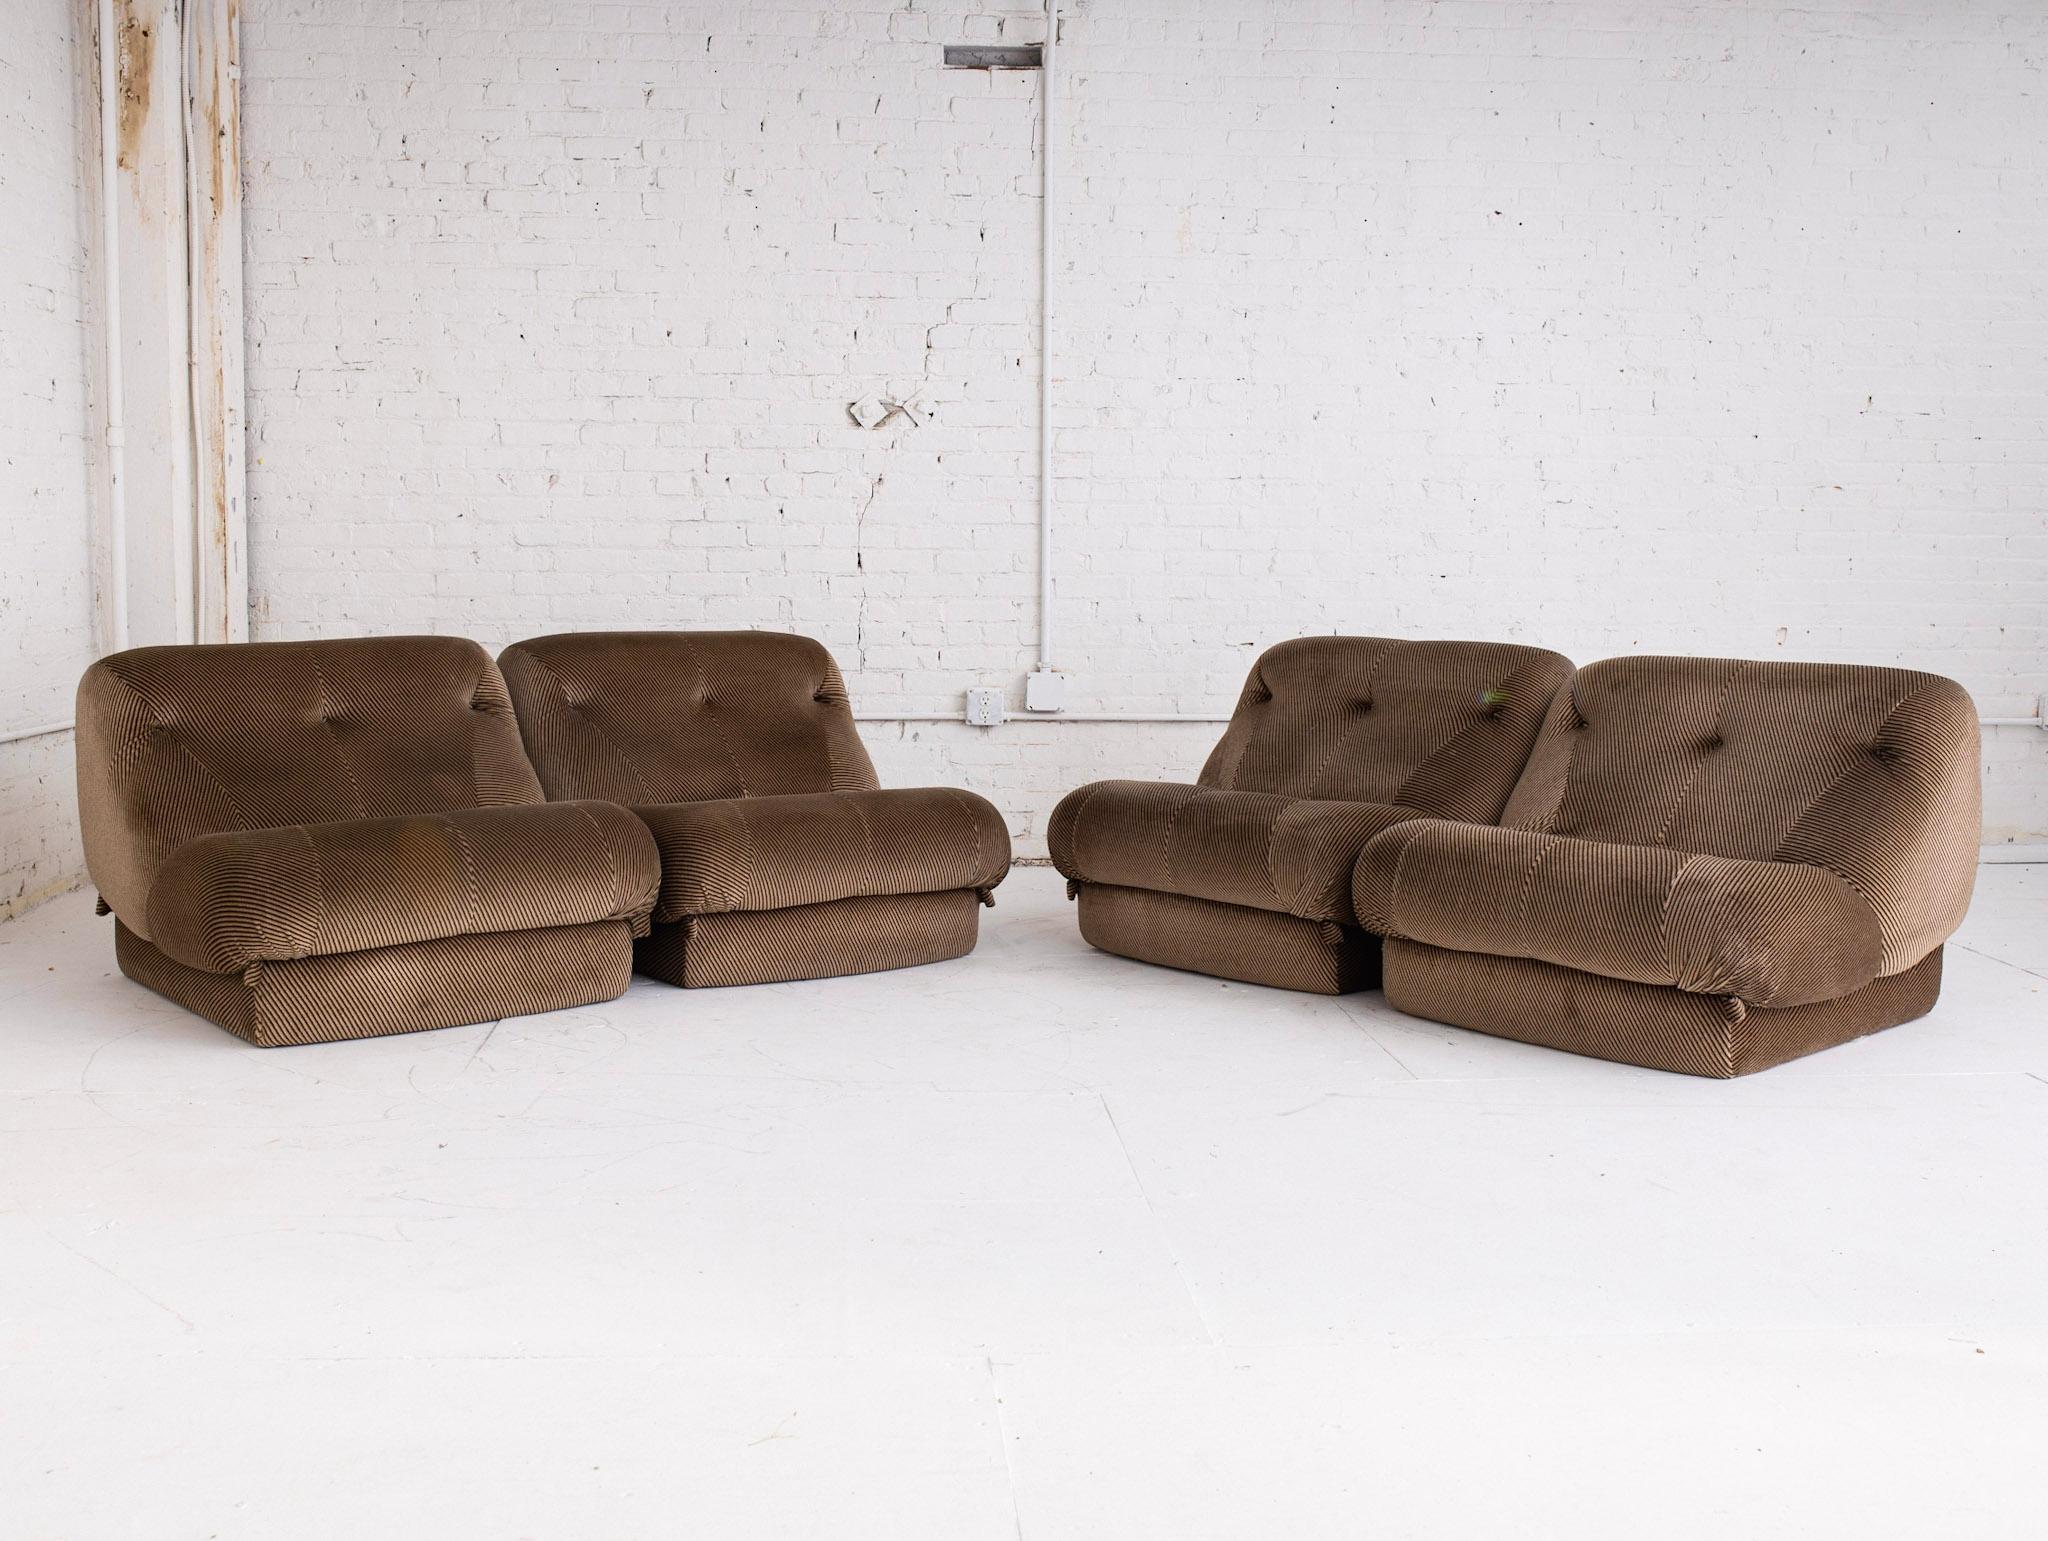 Upholstery Italian 4 Piece Modular Sectional Attributed to Rino Maturi for Mimo Leone and C